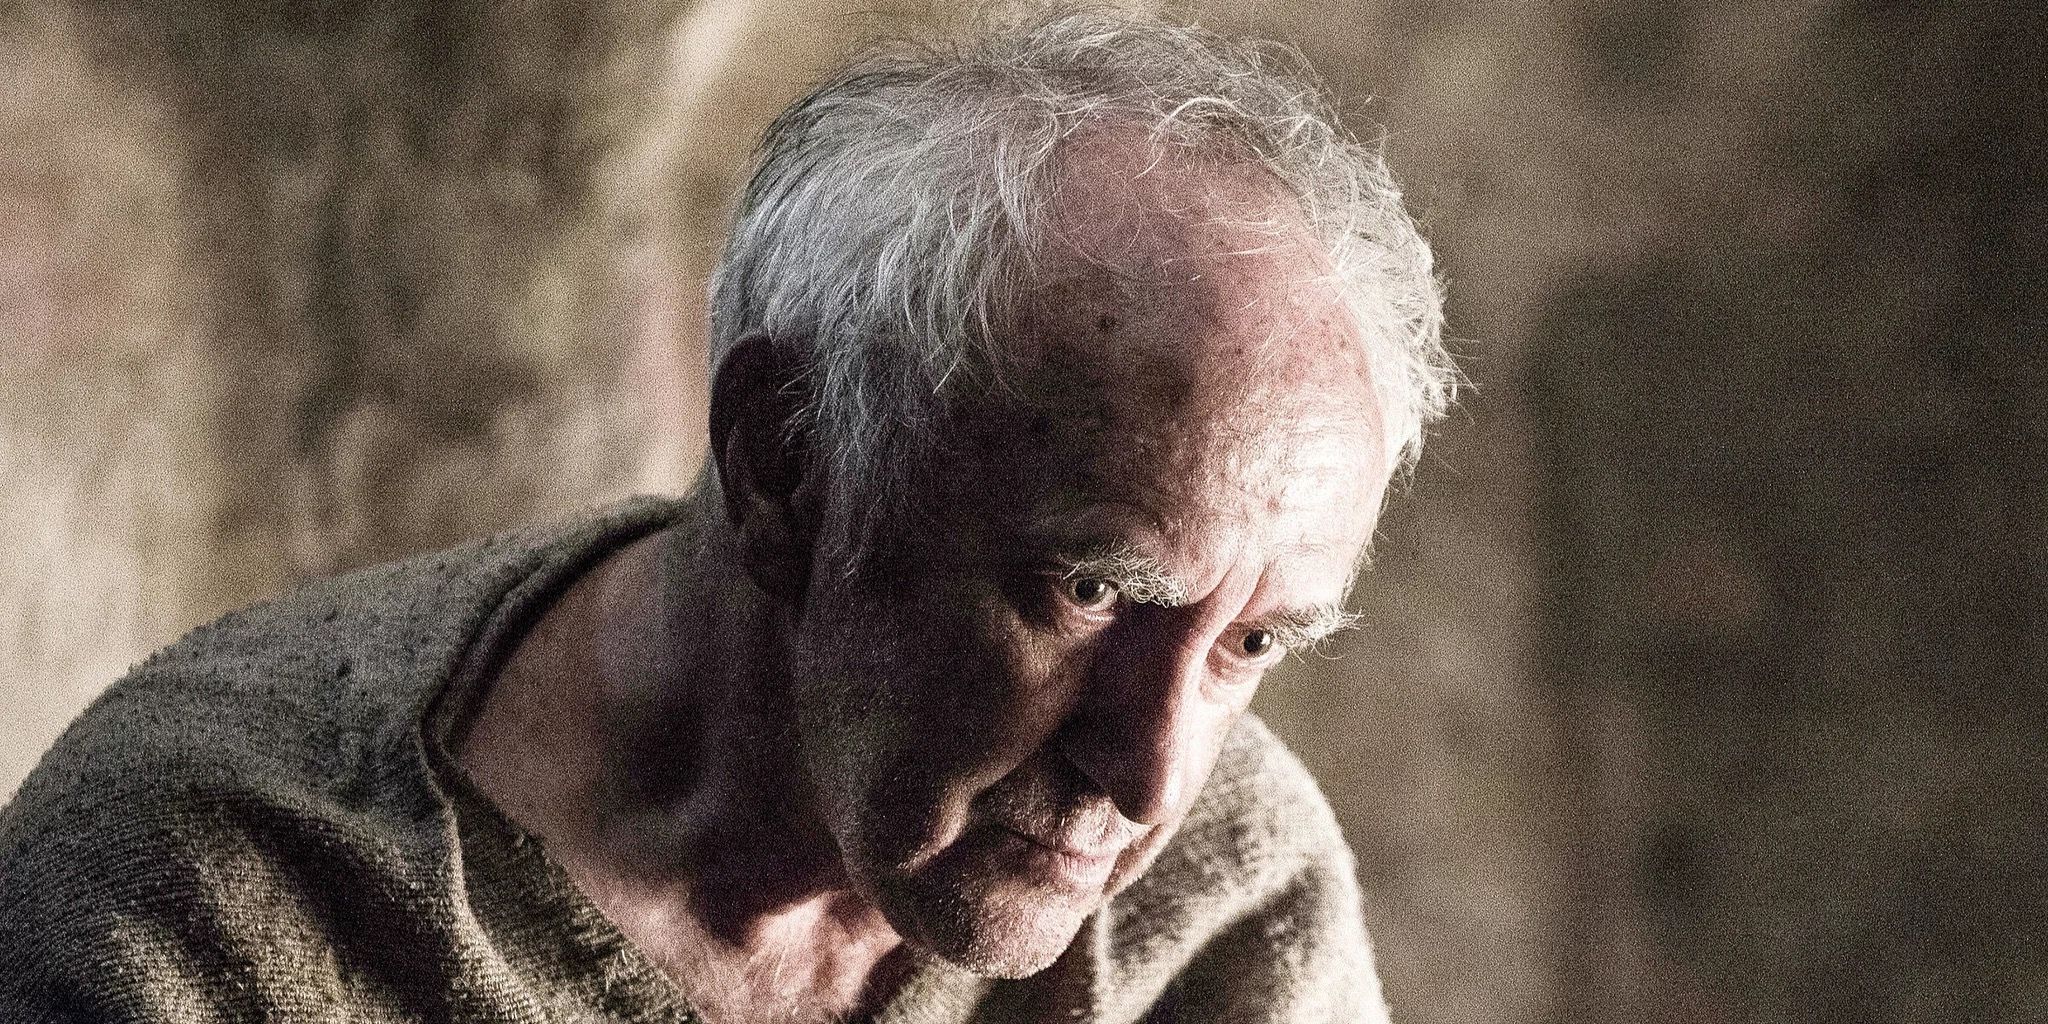 Jonathan Pryce as The High Sparrow on Game of Thrones (2011-2019)